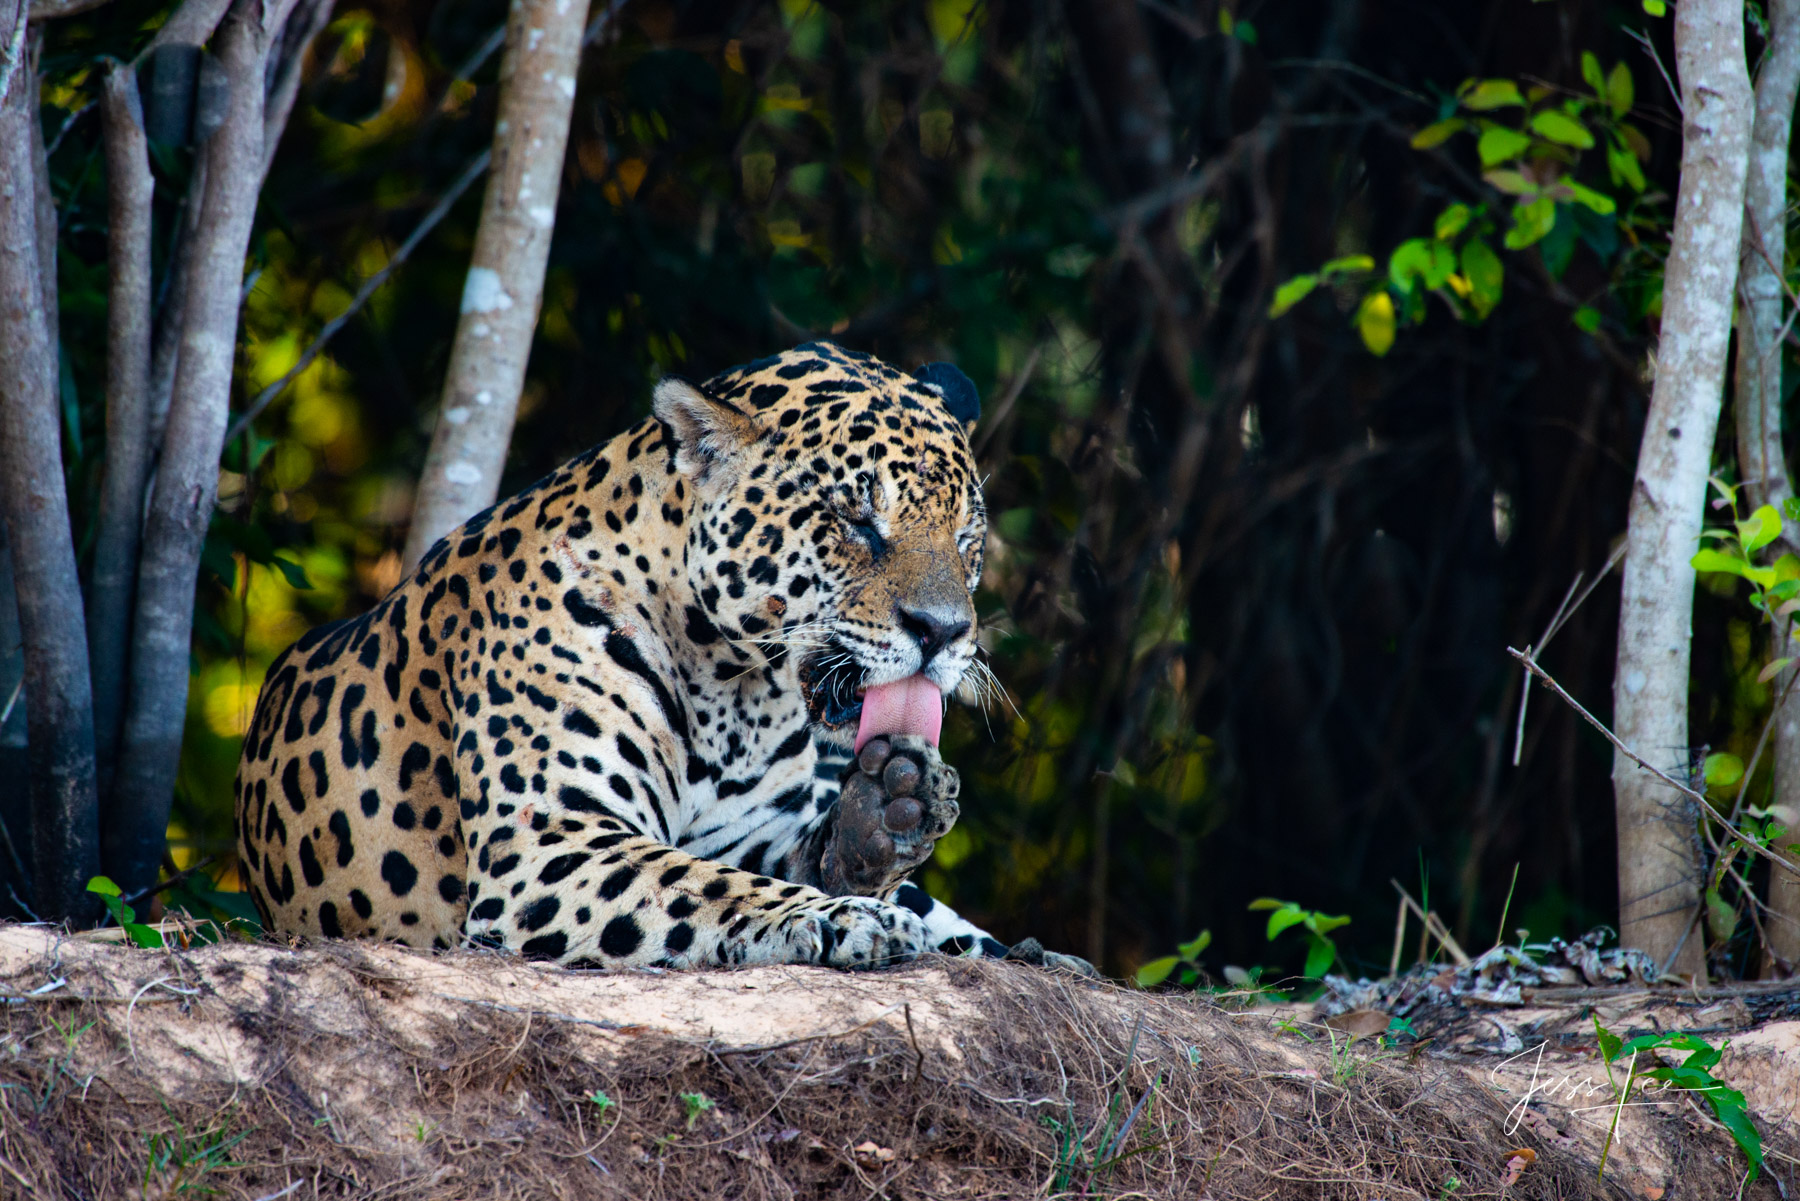 Fine art Jaguar cleaning itself print limited edition of 300 luxury prints by Jess Lee. All photographs copyright © Jess Lee